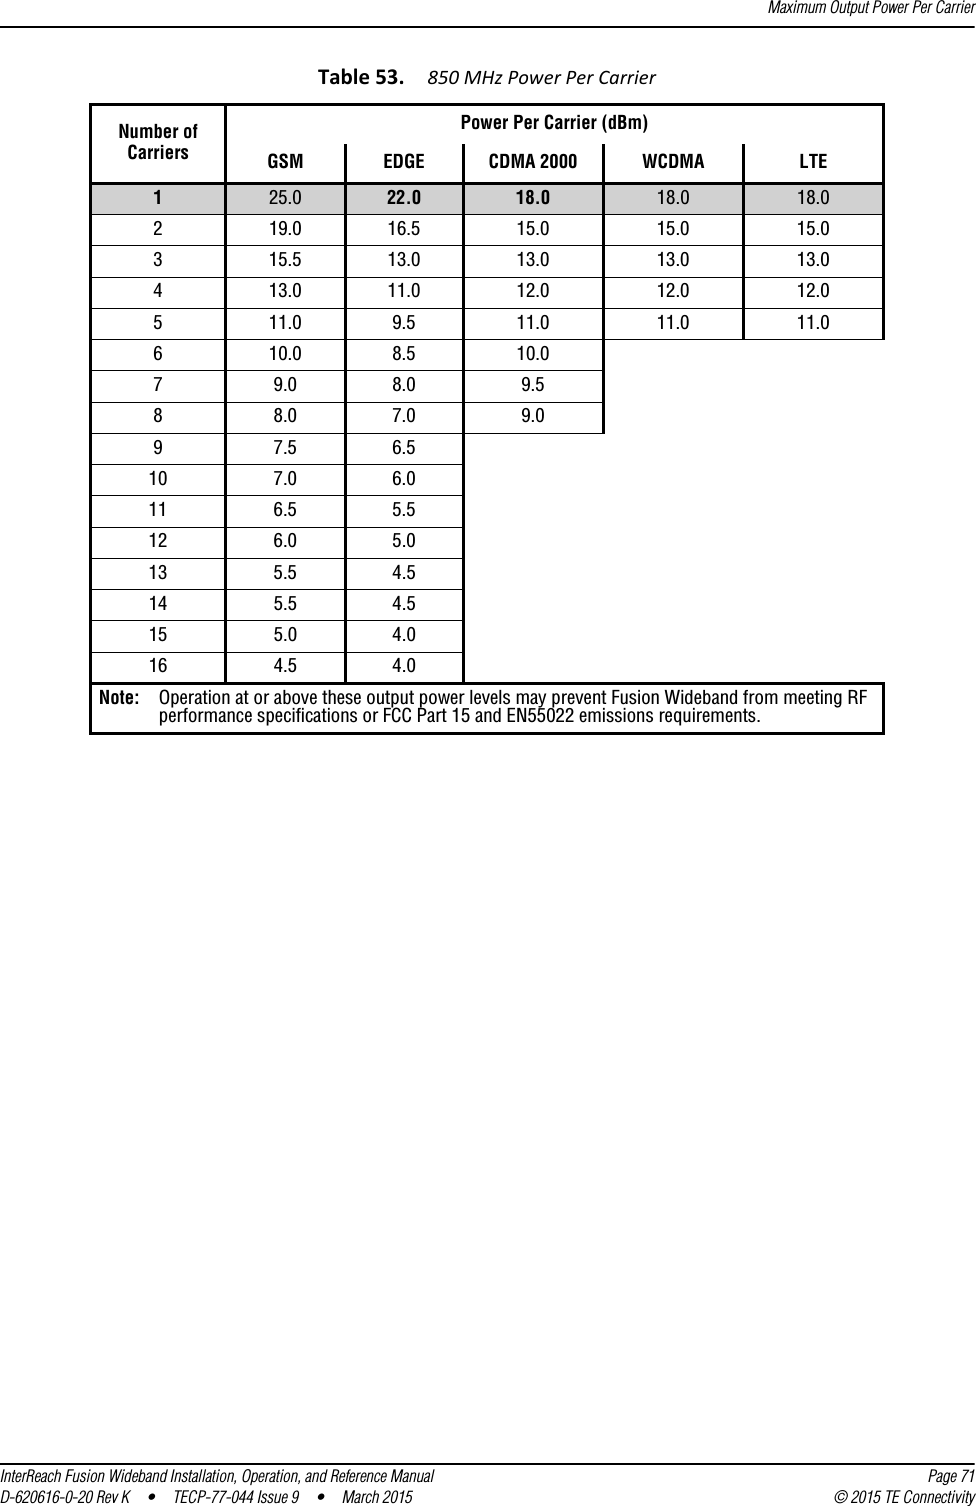 Maximum Output Power Per CarrierInterReach Fusion Wideband Installation, Operation, and Reference Manual Page 71D-620616-0-20 Rev K  •  TECP-77-044 Issue 9  •  March 2015 © 2015 TE ConnectivityTable 53. 850 MHz Power Per CarrierNumber ofCarriersPower Per Carrier (dBm)GSM EDGE CDMA 2000 WCDMA LTE125.0 22.0 18.0 18.0 18.0219.0 16.5 15.0 15.0 15.0315.5 13.0 13.0 13.0 13.0413.0 11.0 12.0 12.0 12.0511.0 9.5 11.0 11.0 11.0610.0 8.5 10.079.0 8.0 9.588.0 7.0 9.097.5 6.510 7.0 6.011 6.5 5.512 6.0 5.013 5.5 4.514 5.5 4.515 5.0 4.016 4.5 4.0Note: Operation at or above these output power levels may prevent Fusion Wideband from meeting RF performance specifications or FCC Part 15 and EN55022 emissions requirements. 